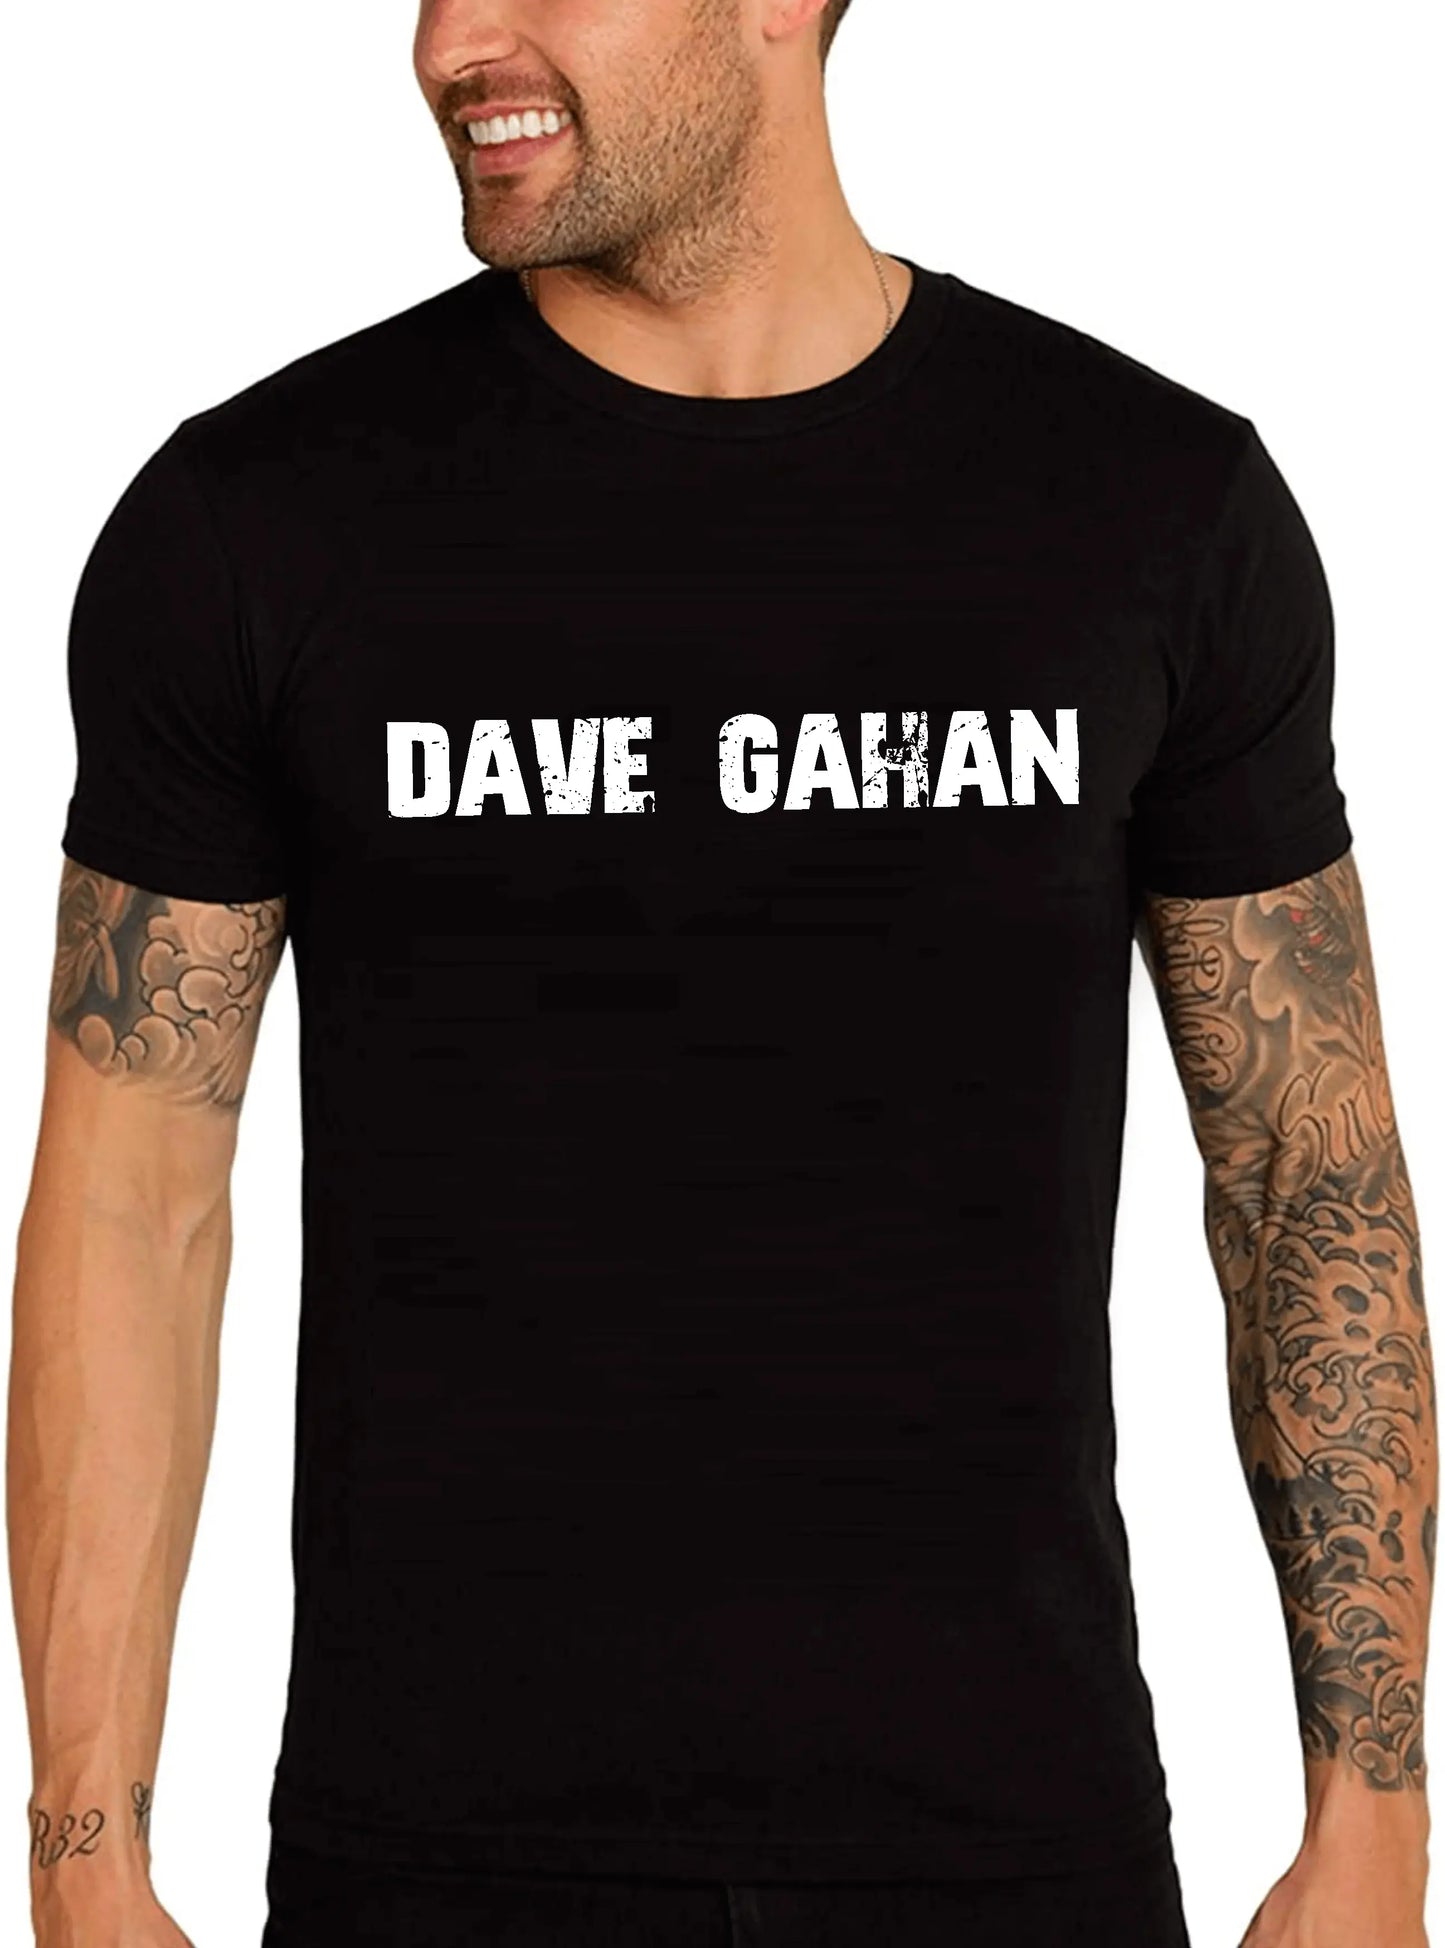 Men's Graphic T-Shirt Dave Gahan Eco-Friendly Limited Edition Short Sleeve Tee-Shirt Vintage Birthday Gift Novelty